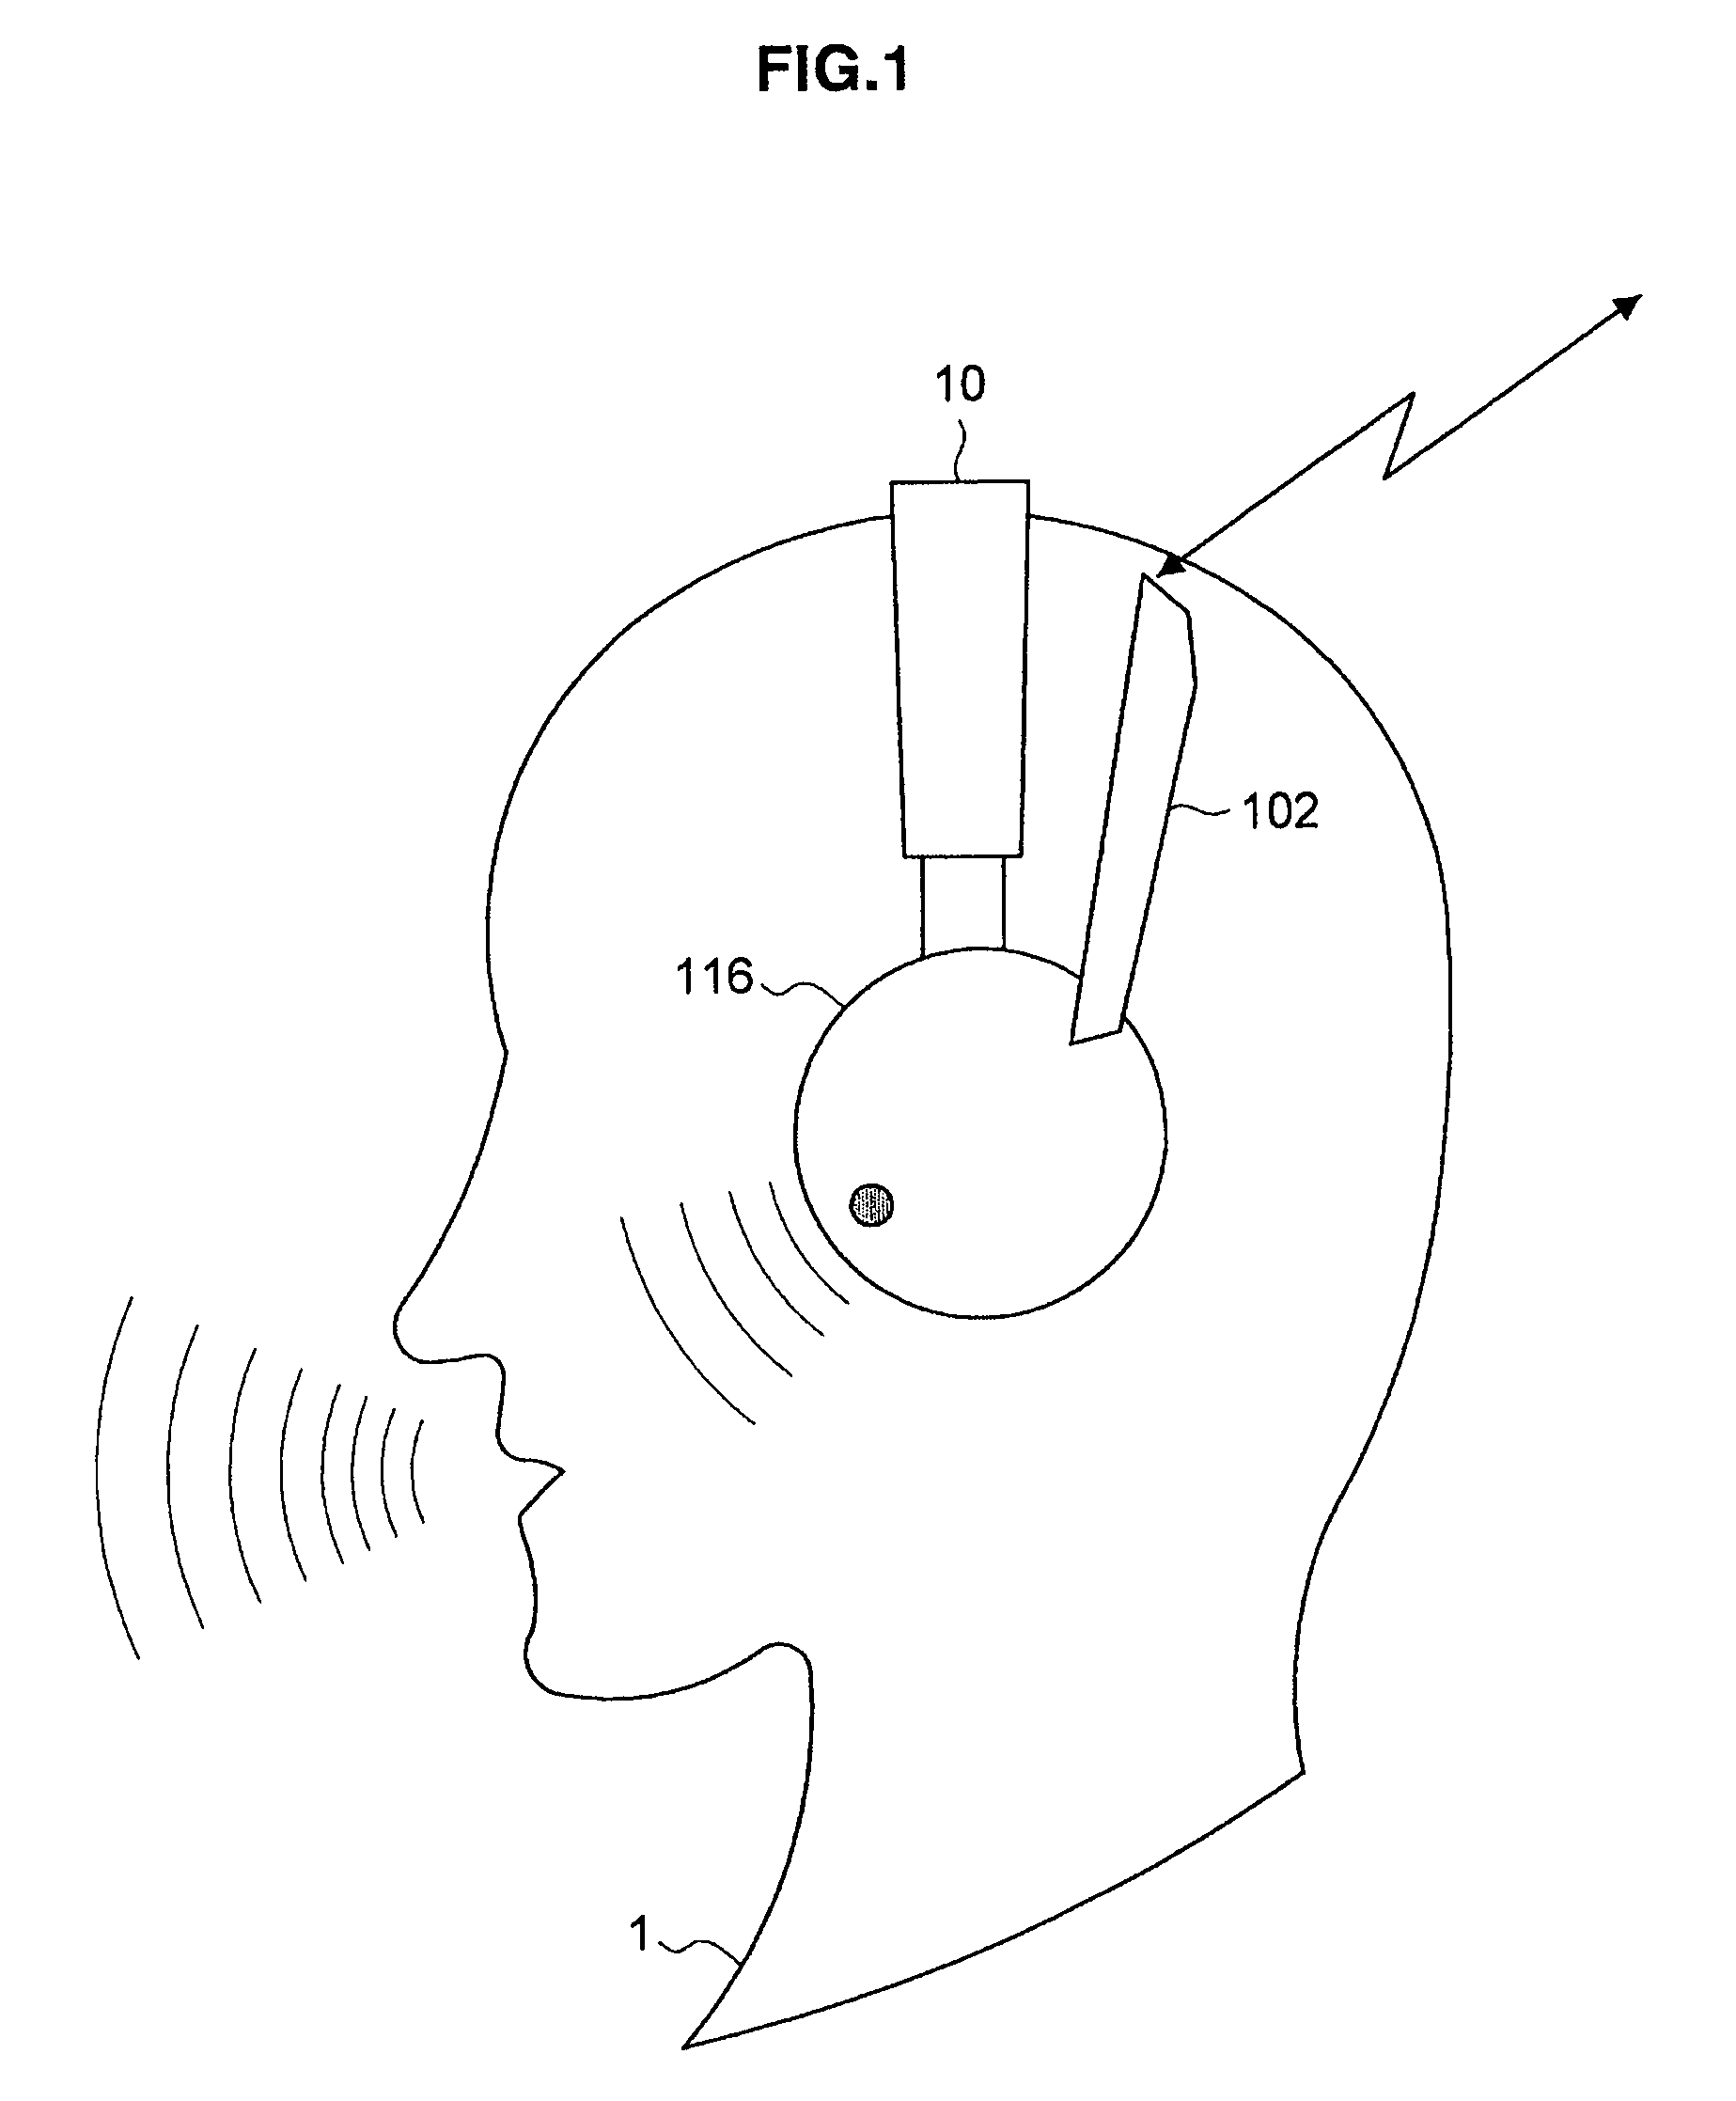 Sound reproducing device and sound reproduction method